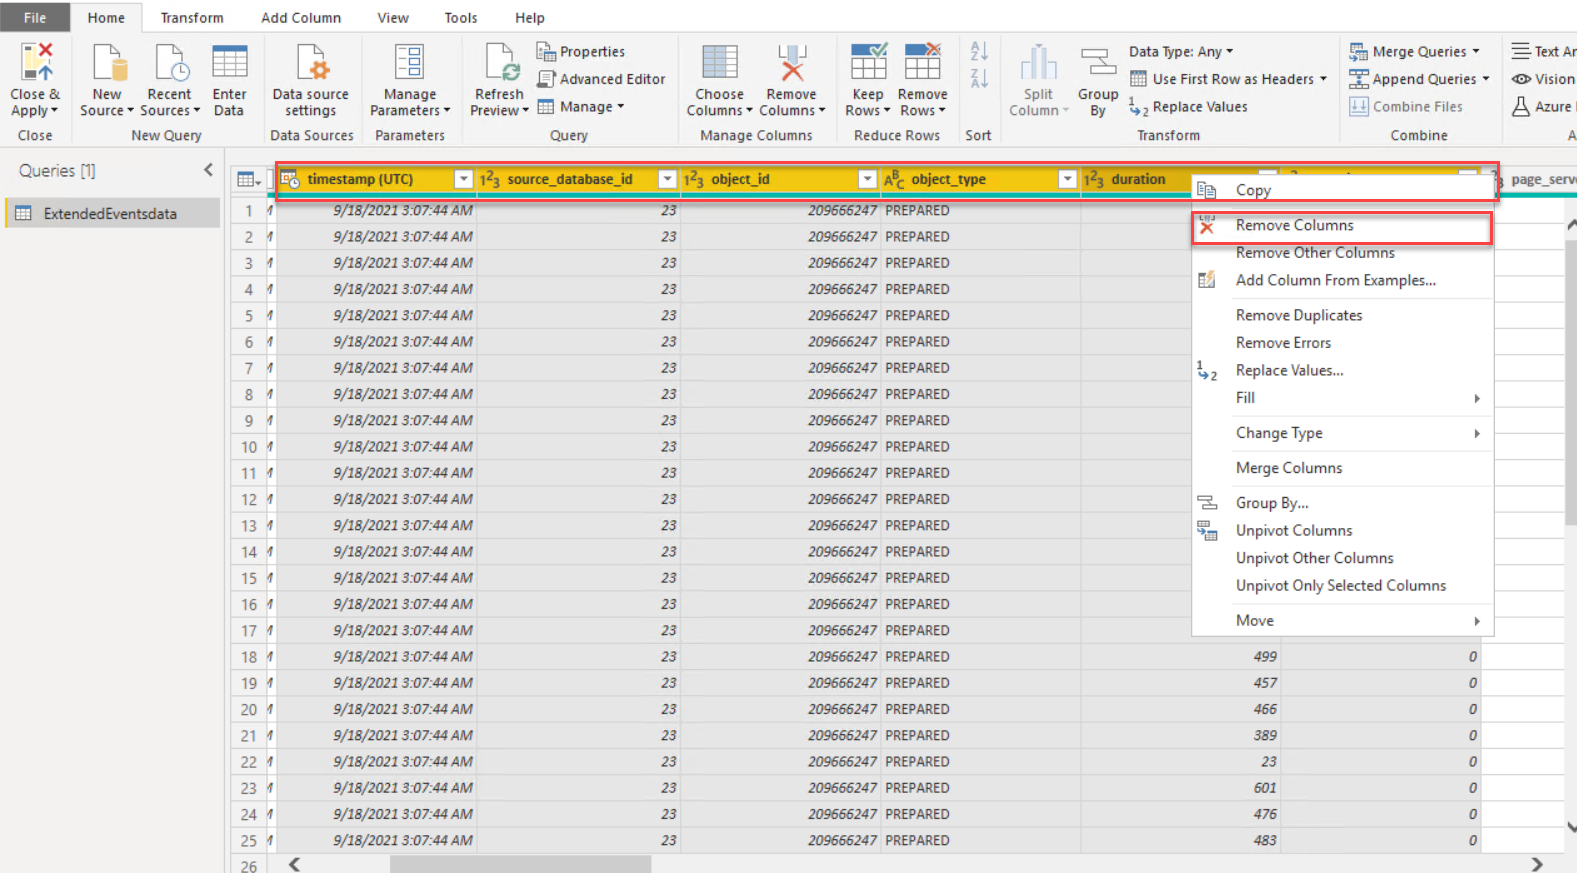 Remove irrelevant columns from extended events file